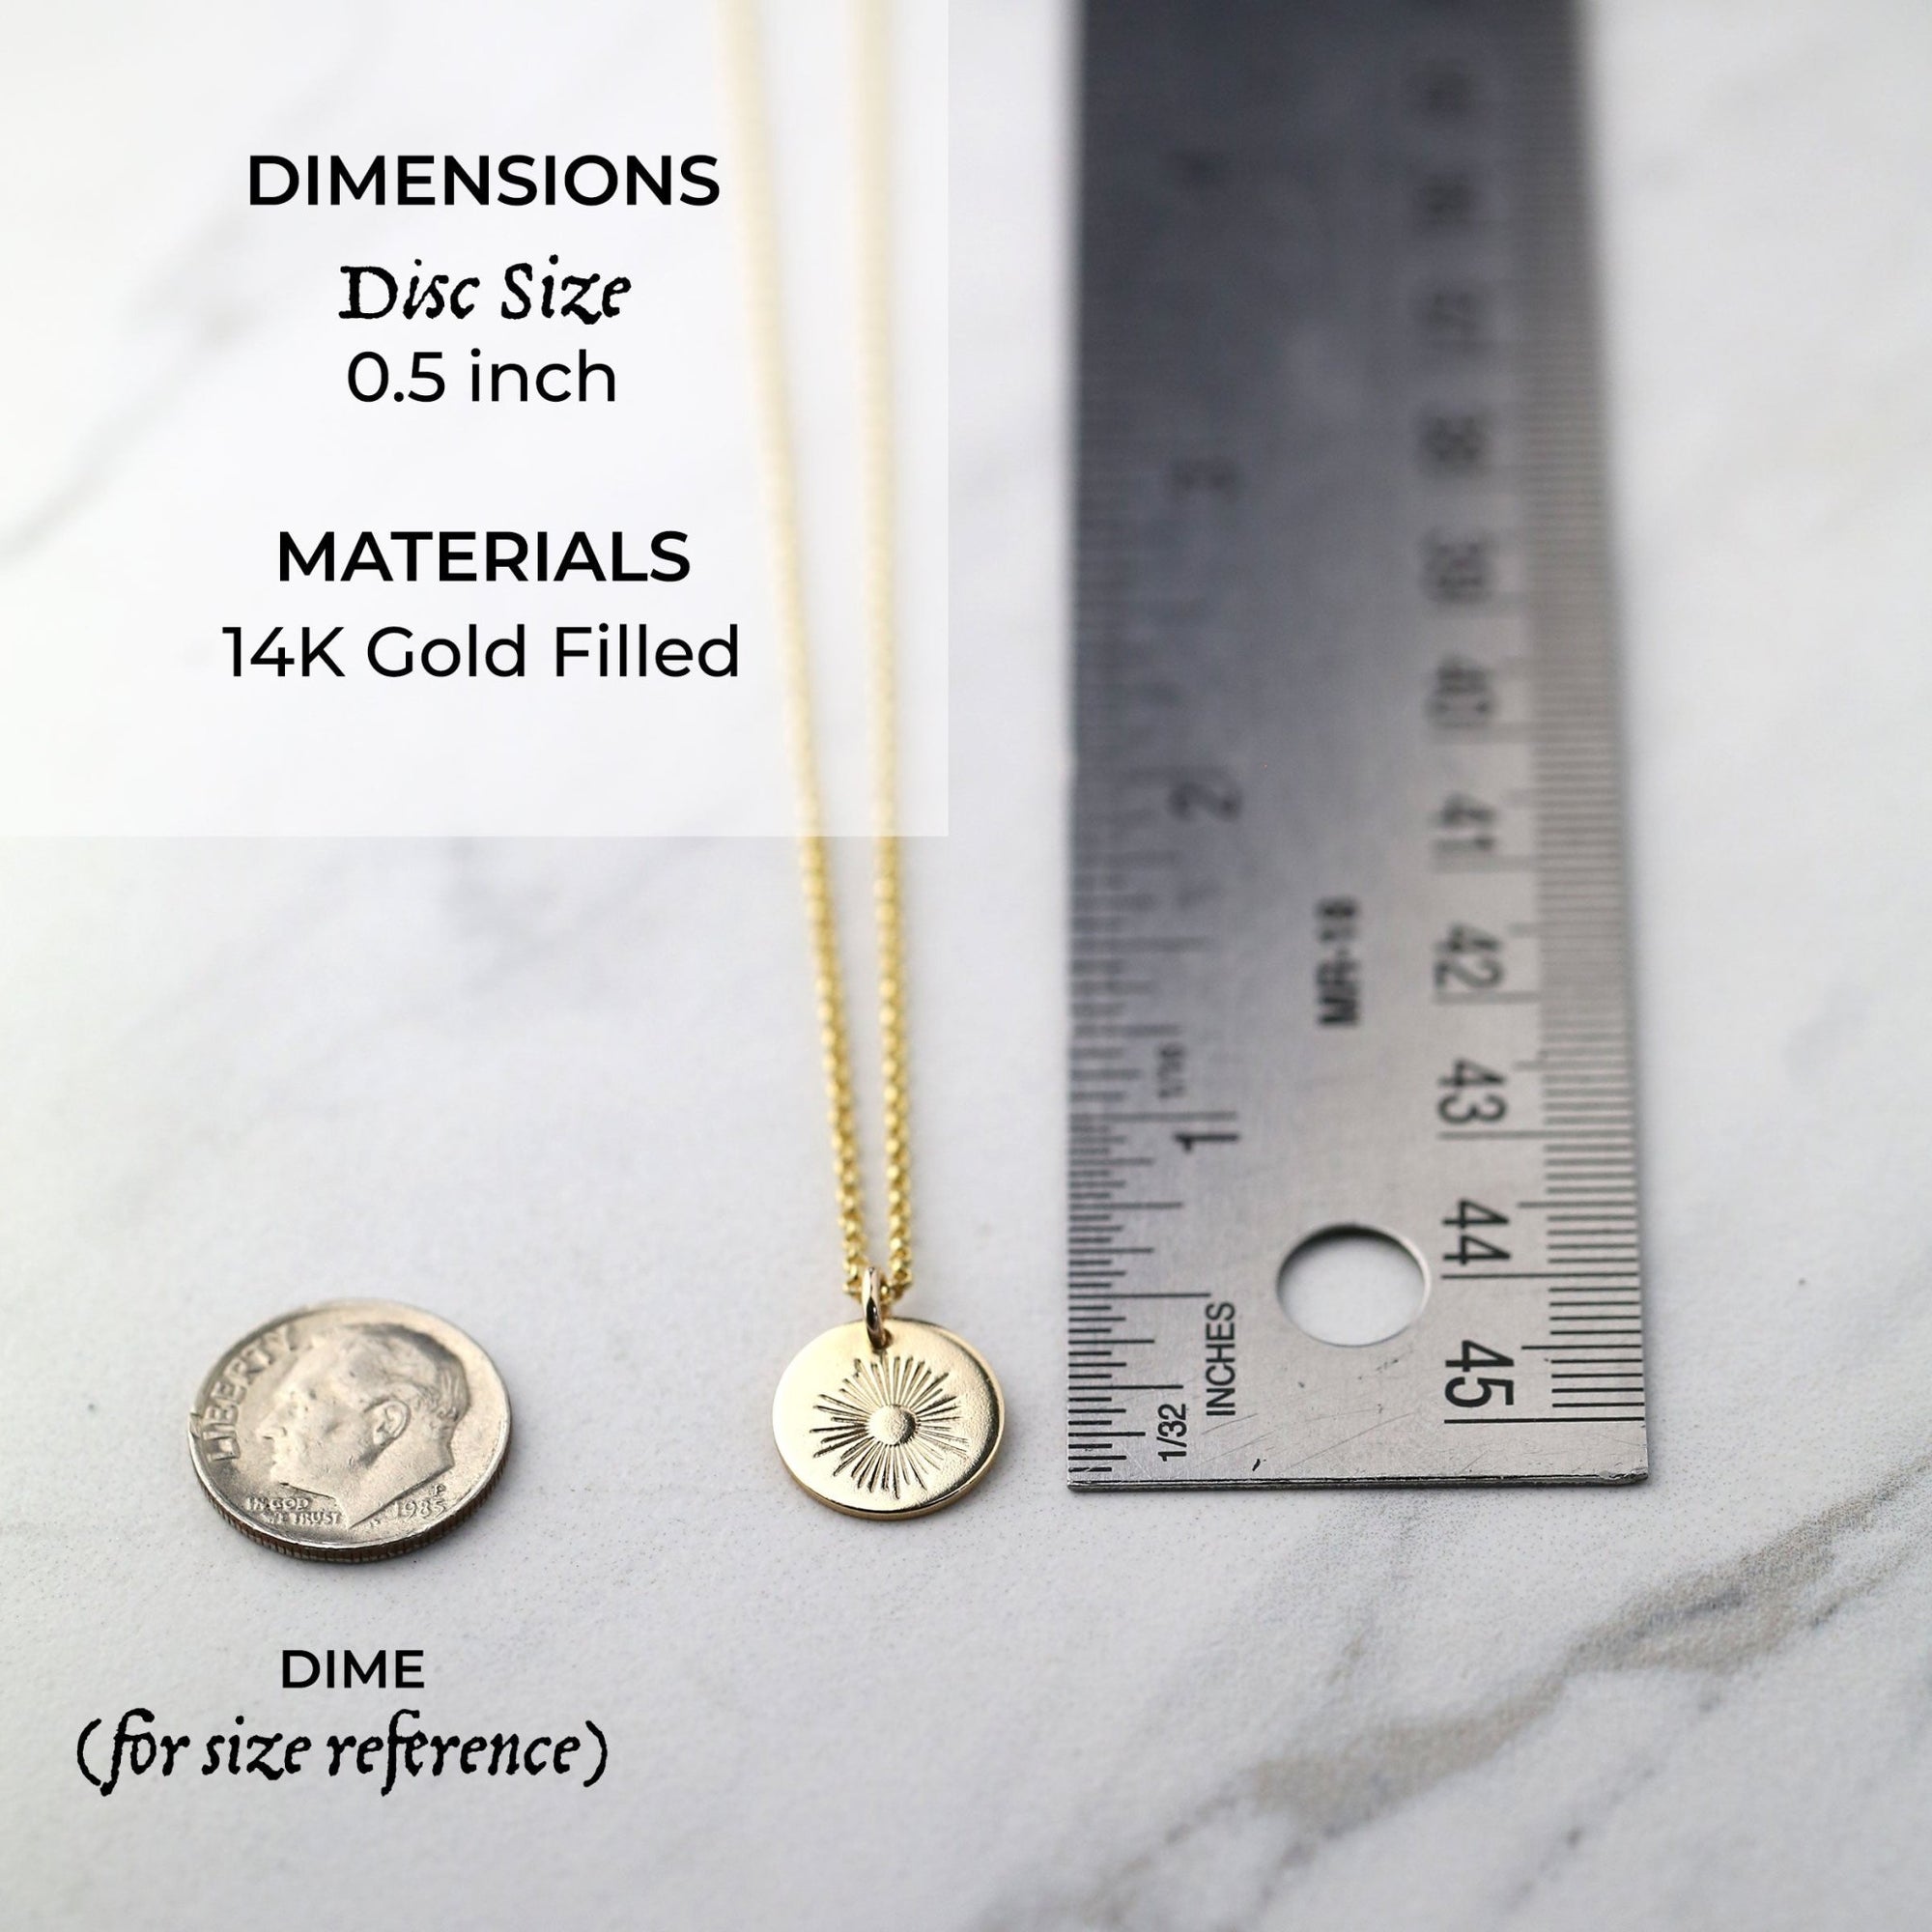 Gold filled necklace pendant dimensions are 0.5 inch.